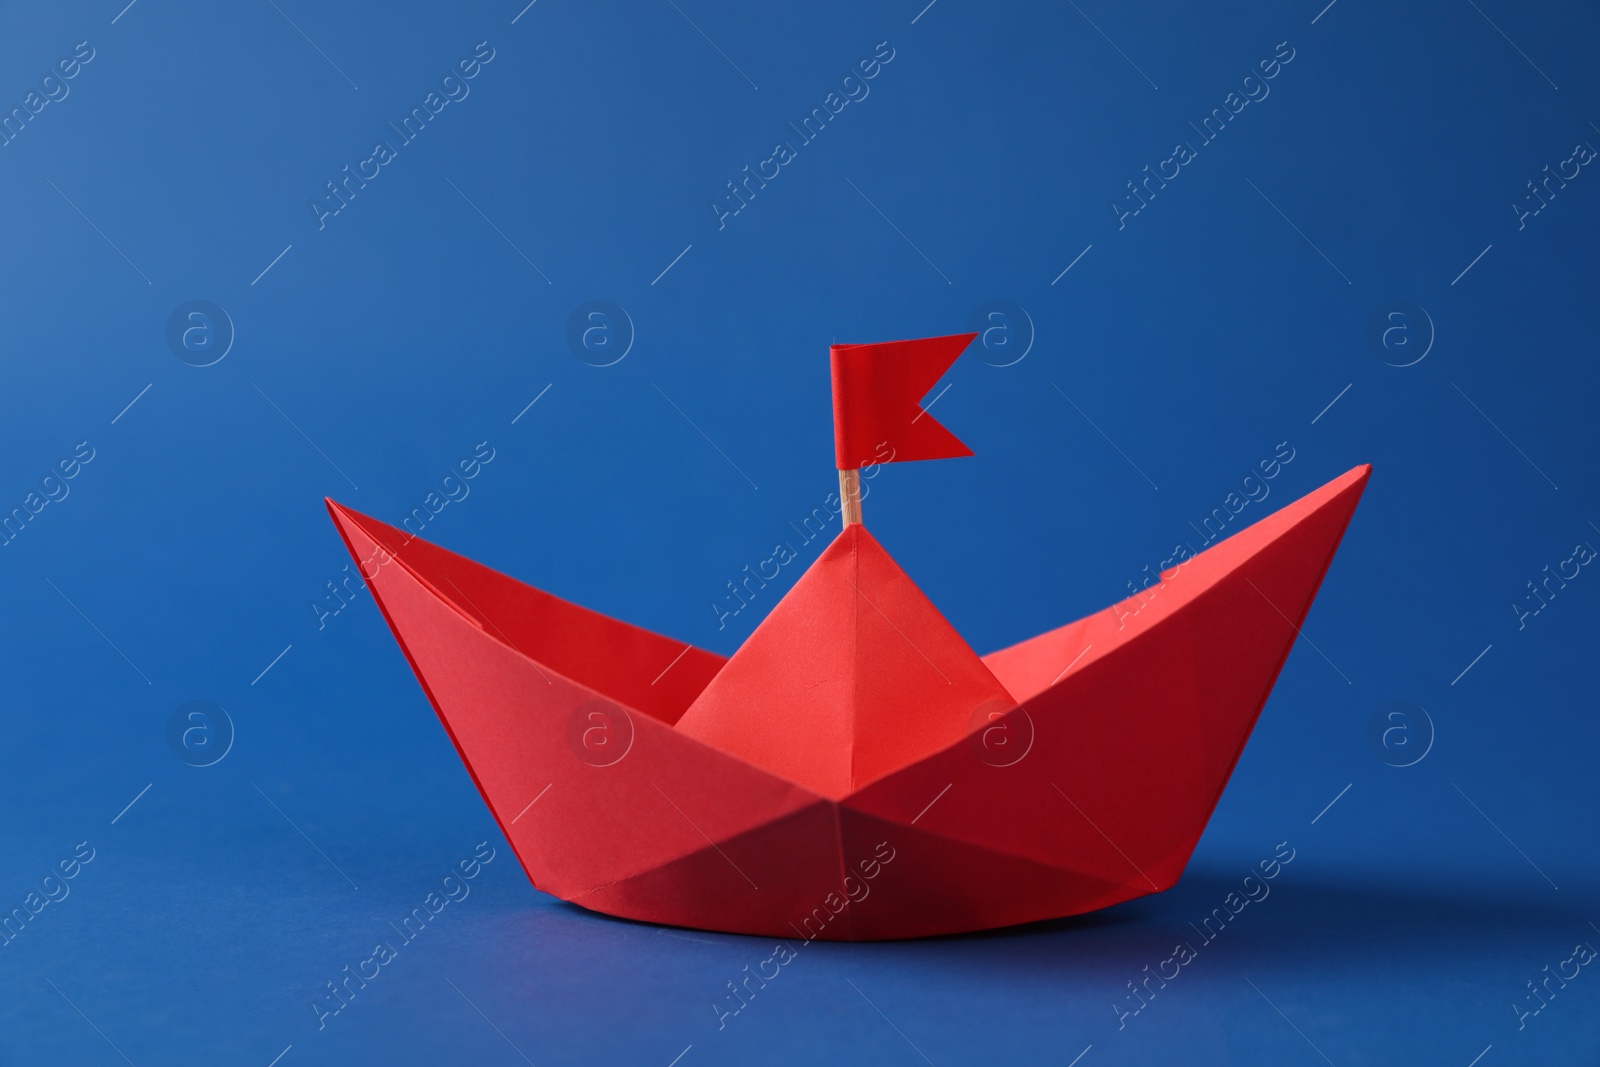 Photo of Handmade red paper boat with flag on blue background. Origami art